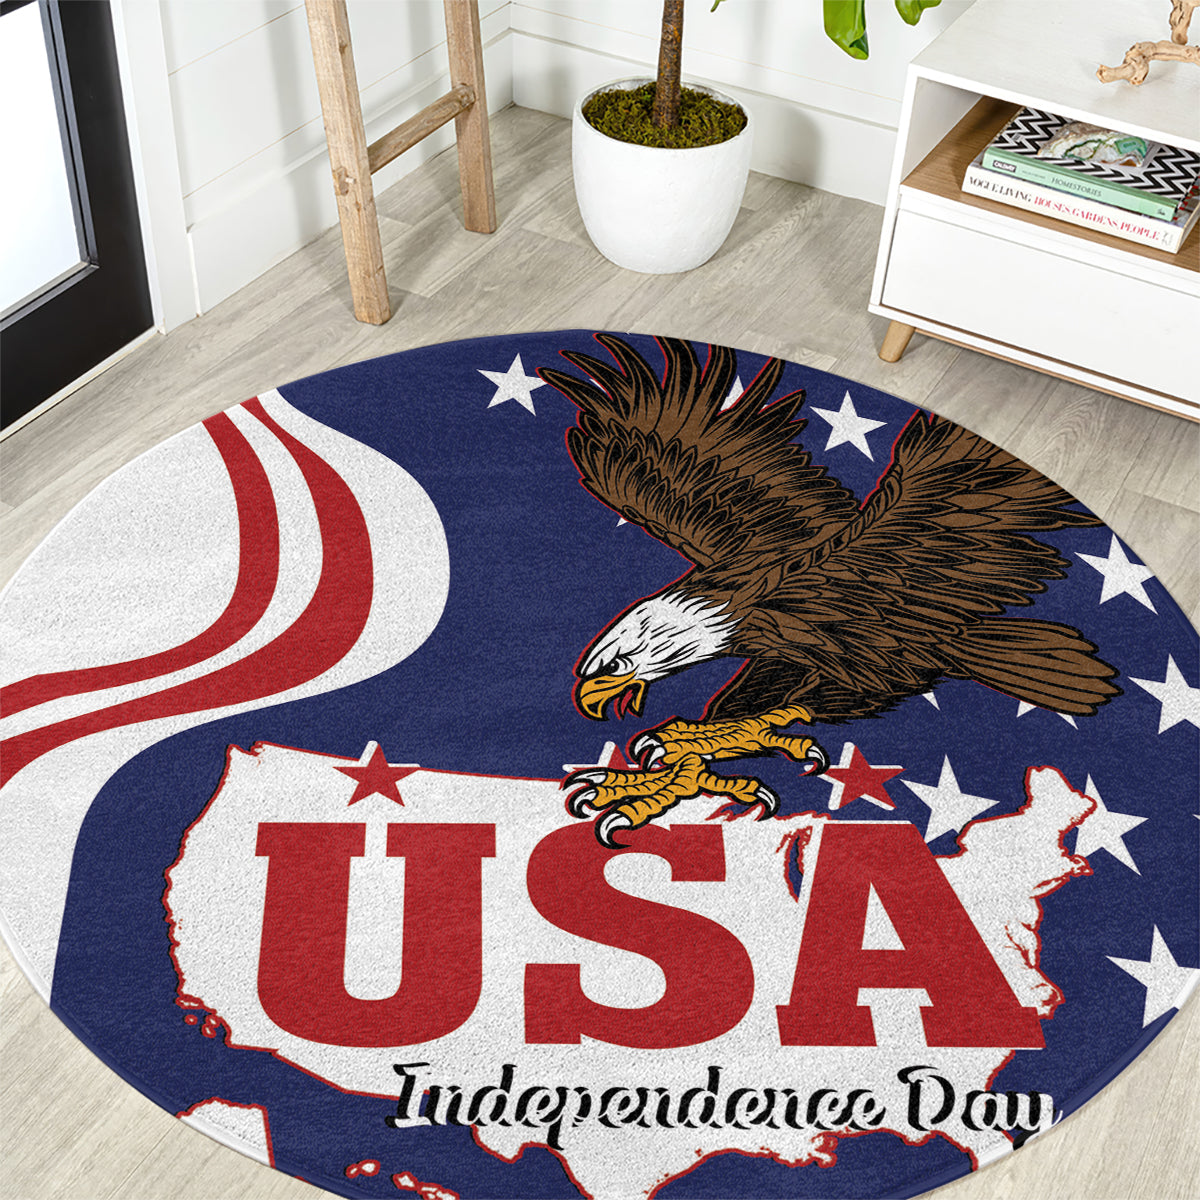 United States Independence Day Round Carpet USA Bald Eagle Happy 4th Of July